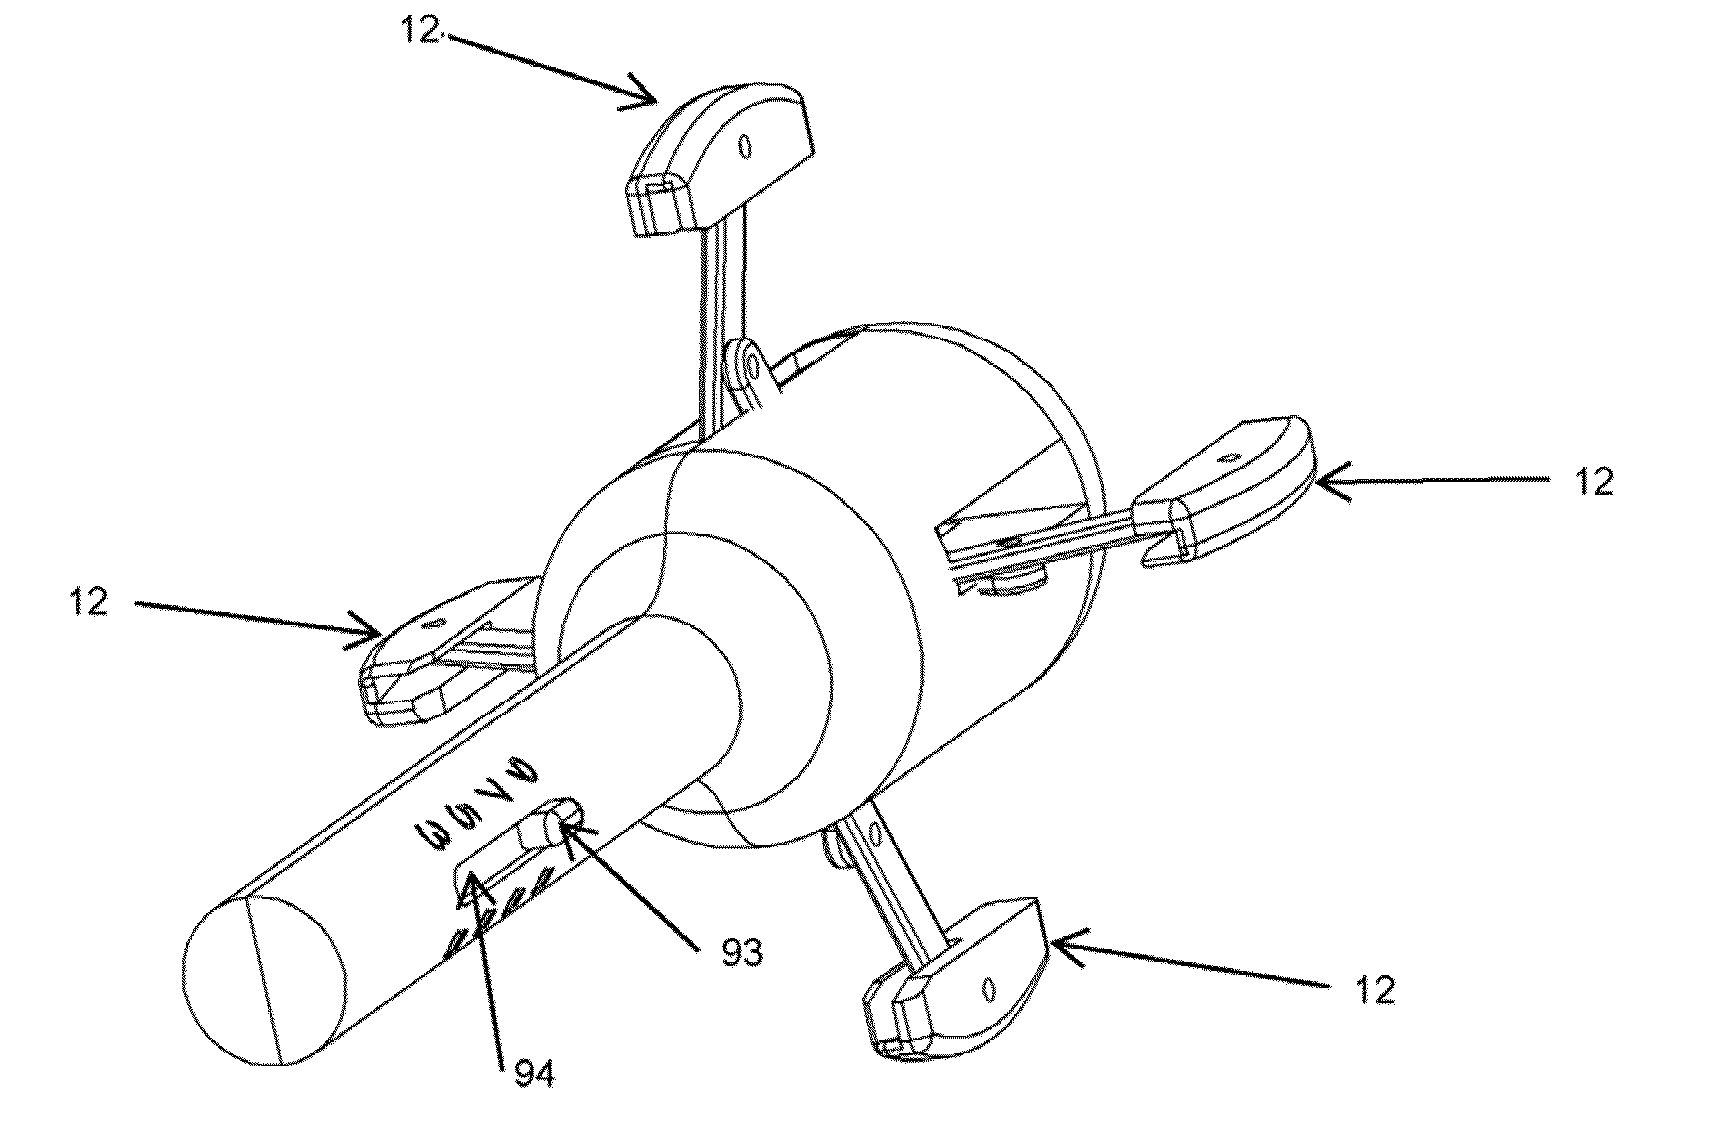 Device and method for fitting a pessary